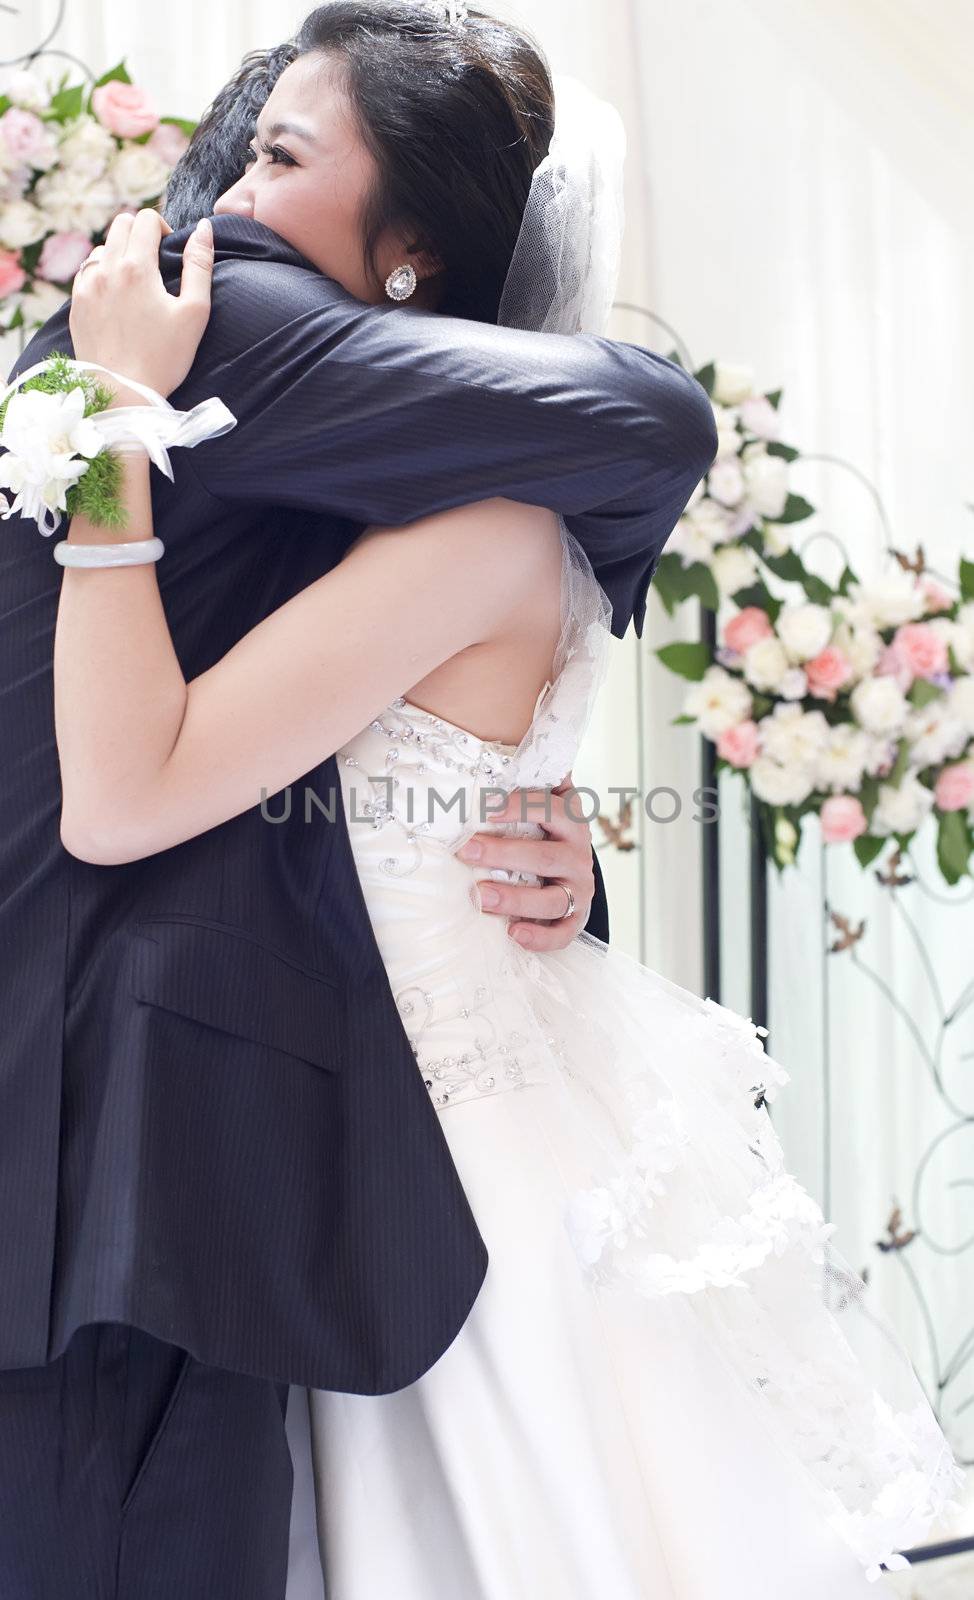 a young couple embracing on their wedding day by jackq